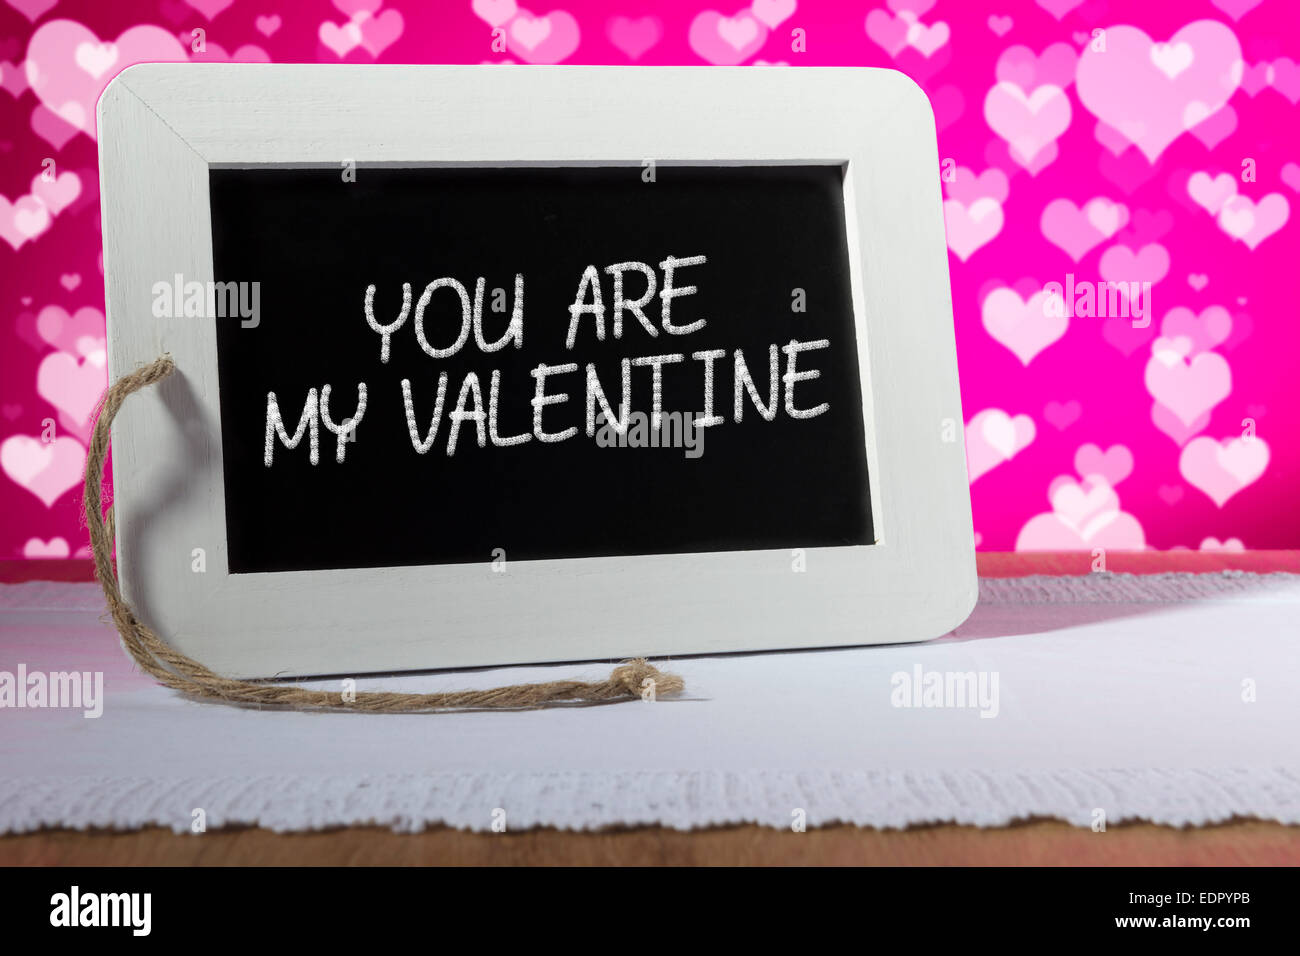 Image of a slate blackboard with chalk message YOU ARE MY VALENTINE and pink background Stock Photo